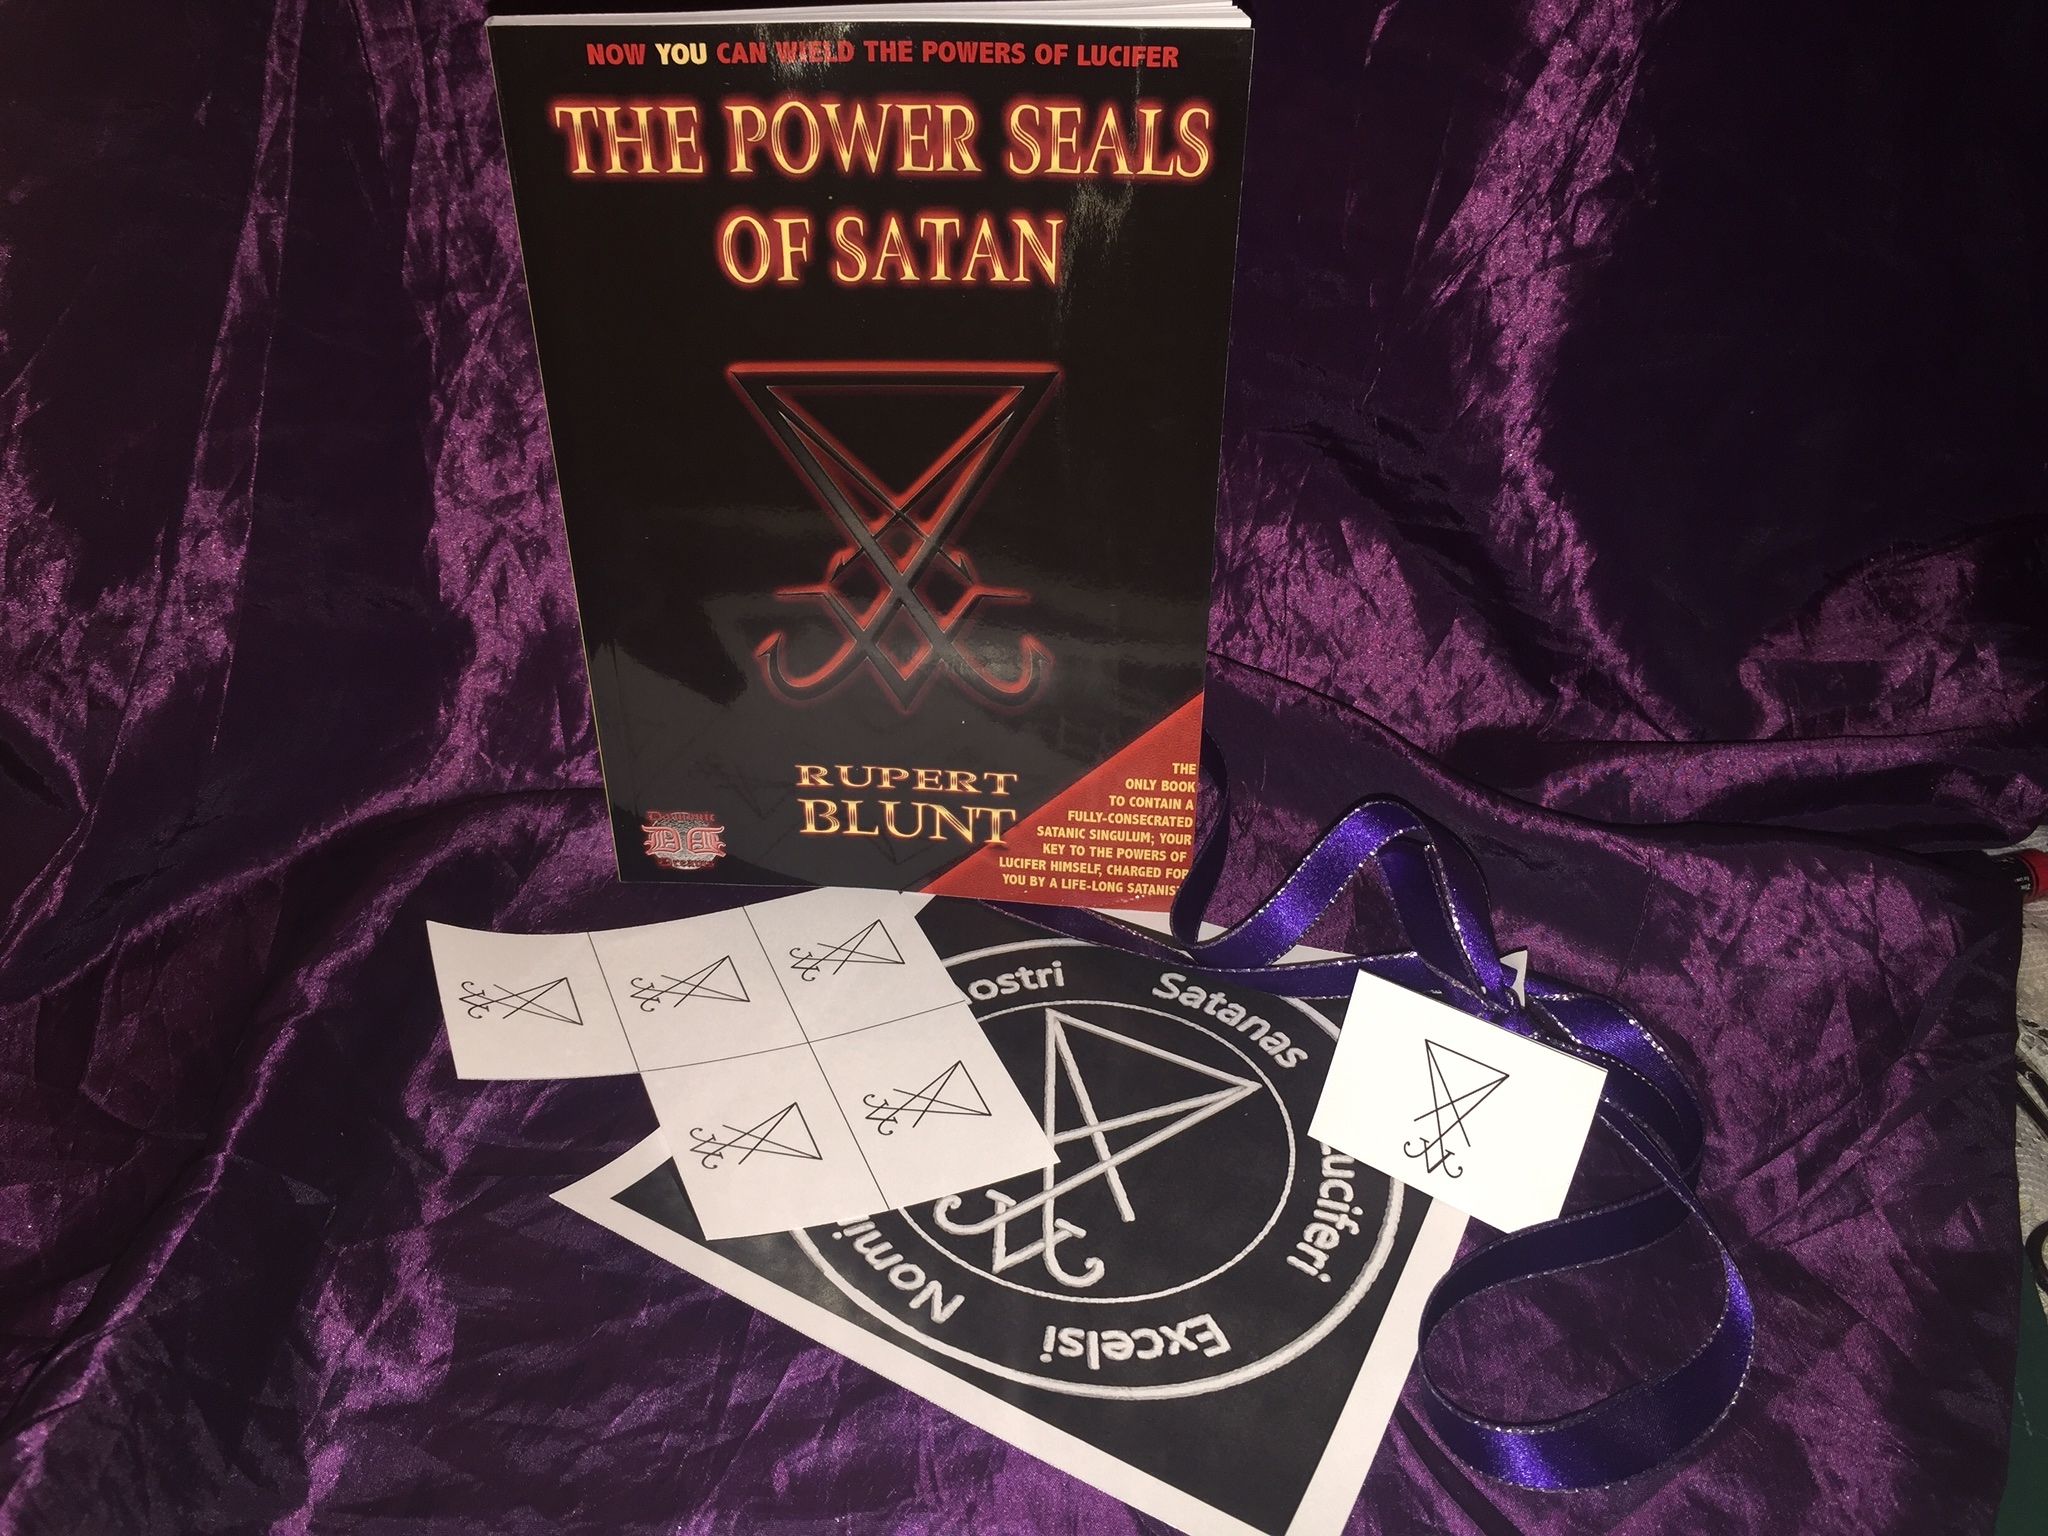 Magick Spells Rituals Occult Goetia Witchcraft MAGICKAL POWERS OF THE OCCULT 